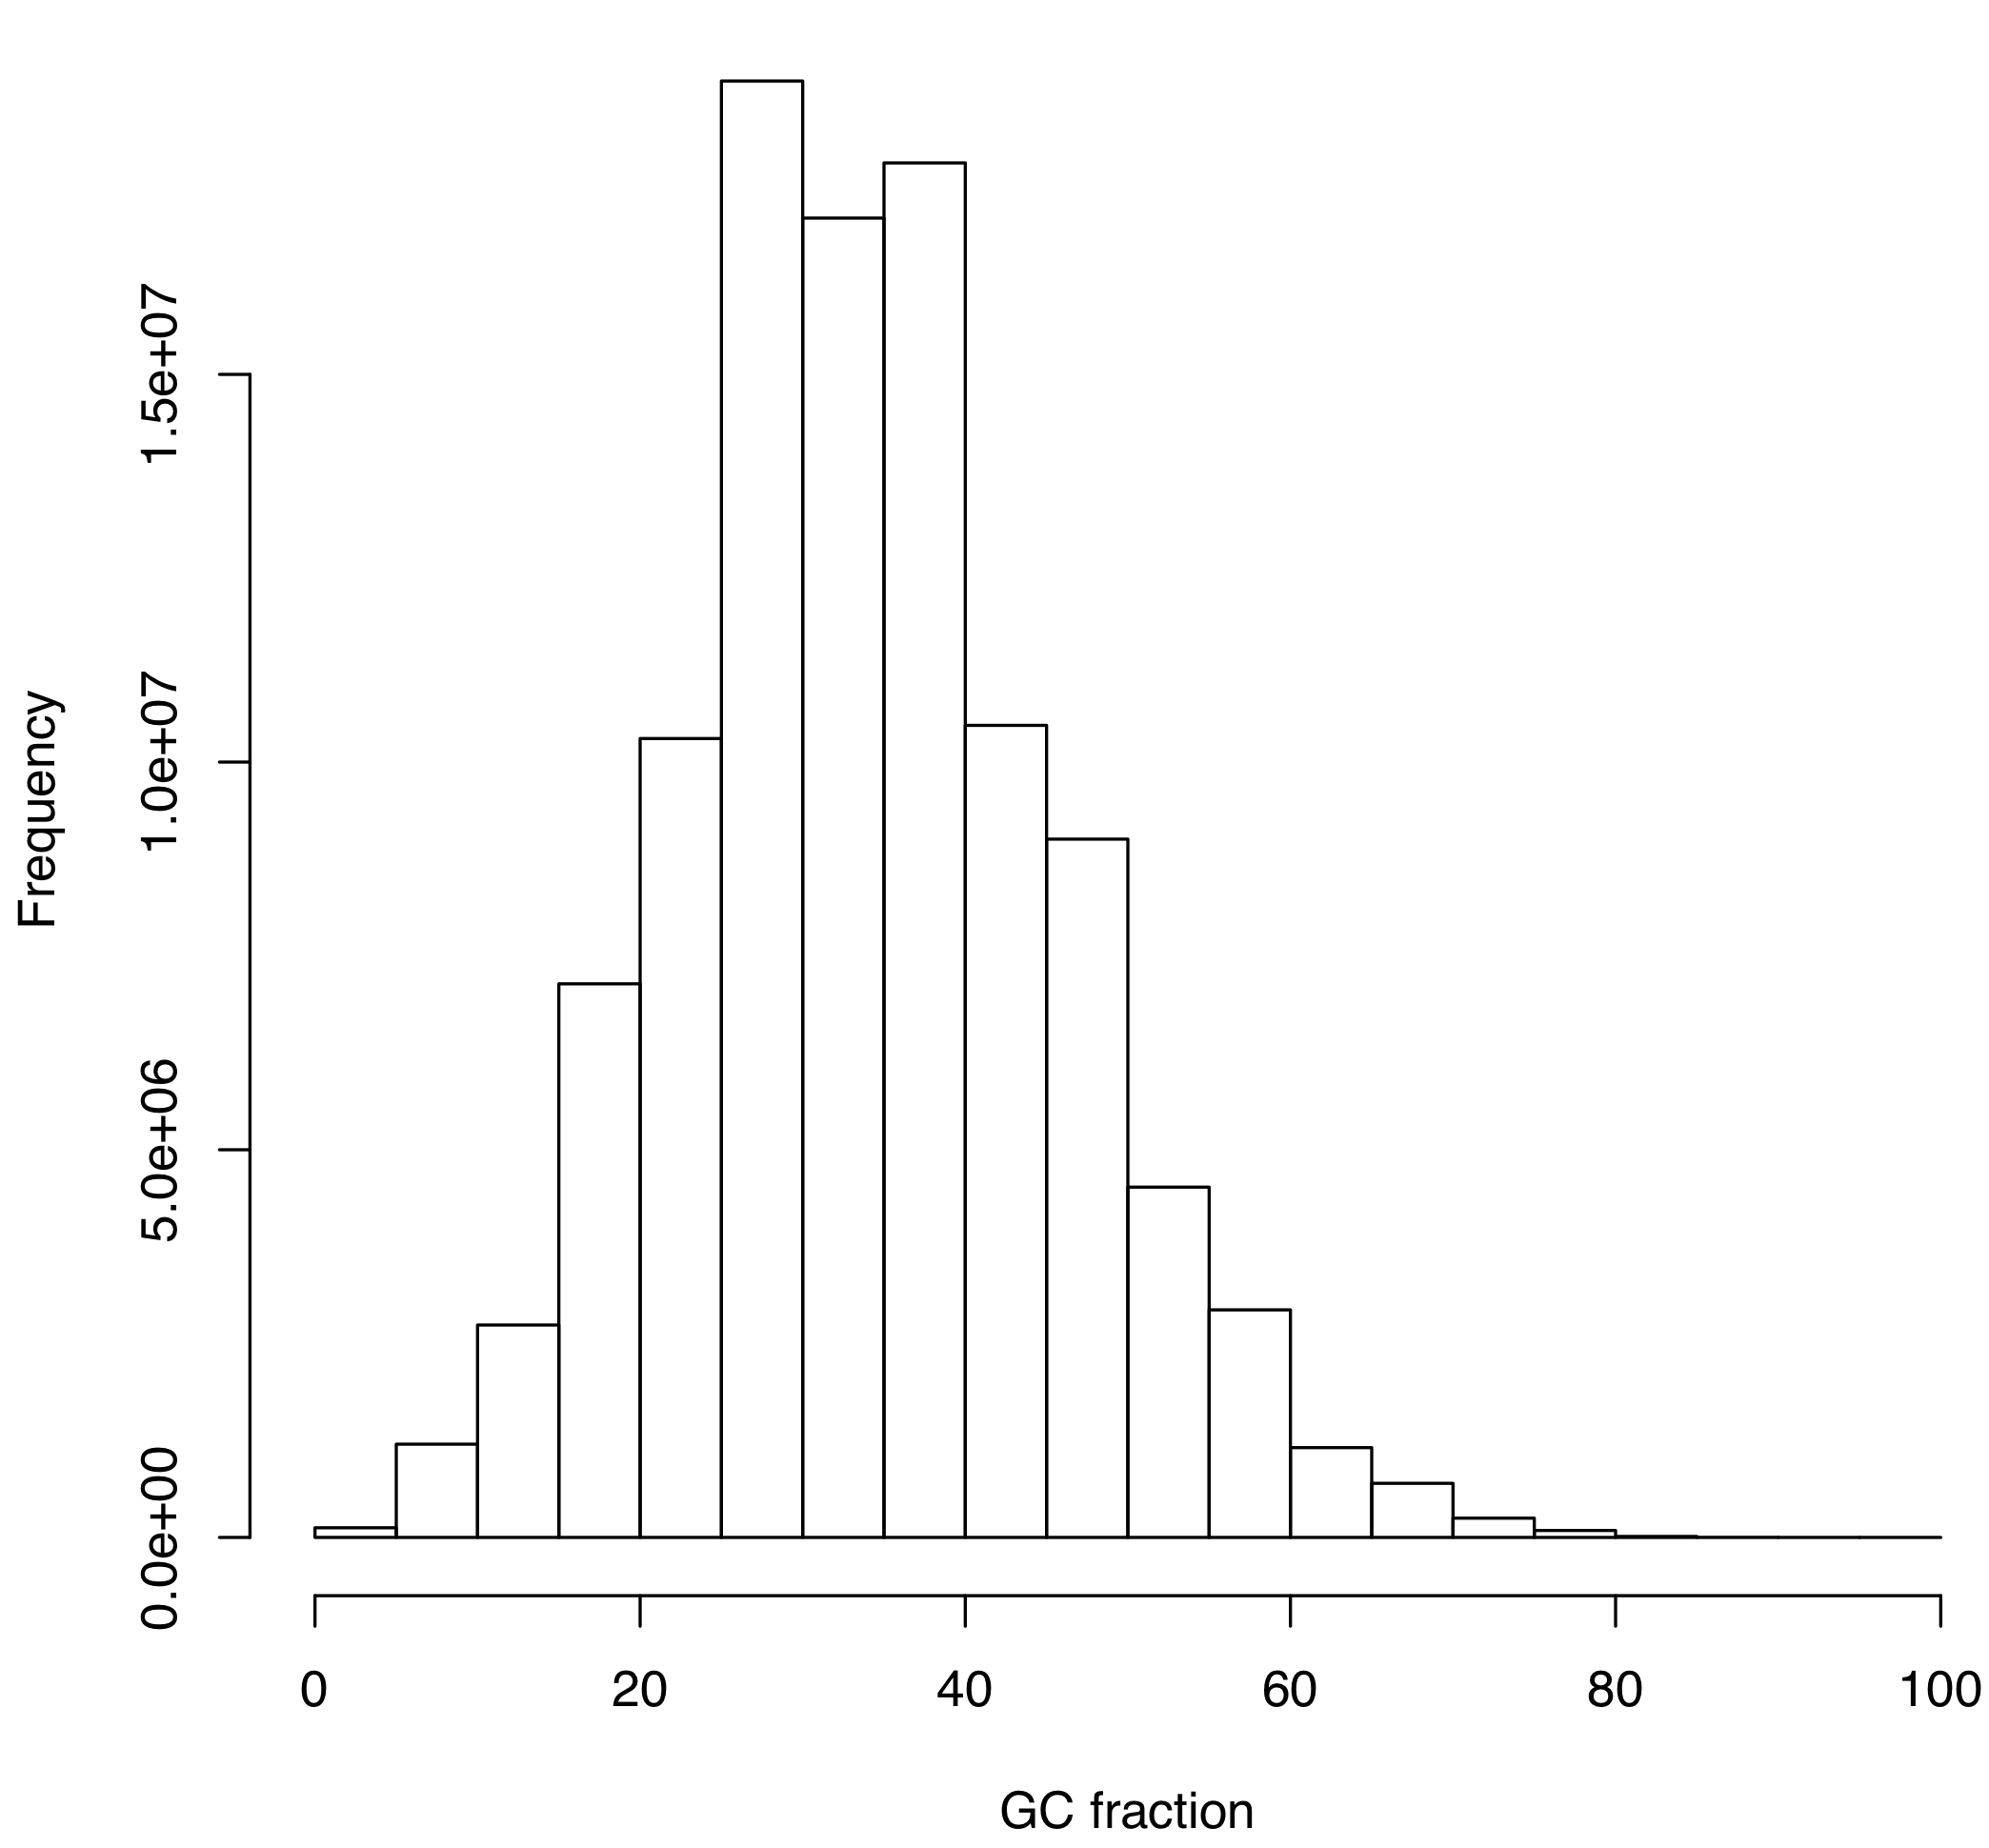 Histogram of GC values inferred from the cleaned library of reads (SRR5759389). See text for more details.